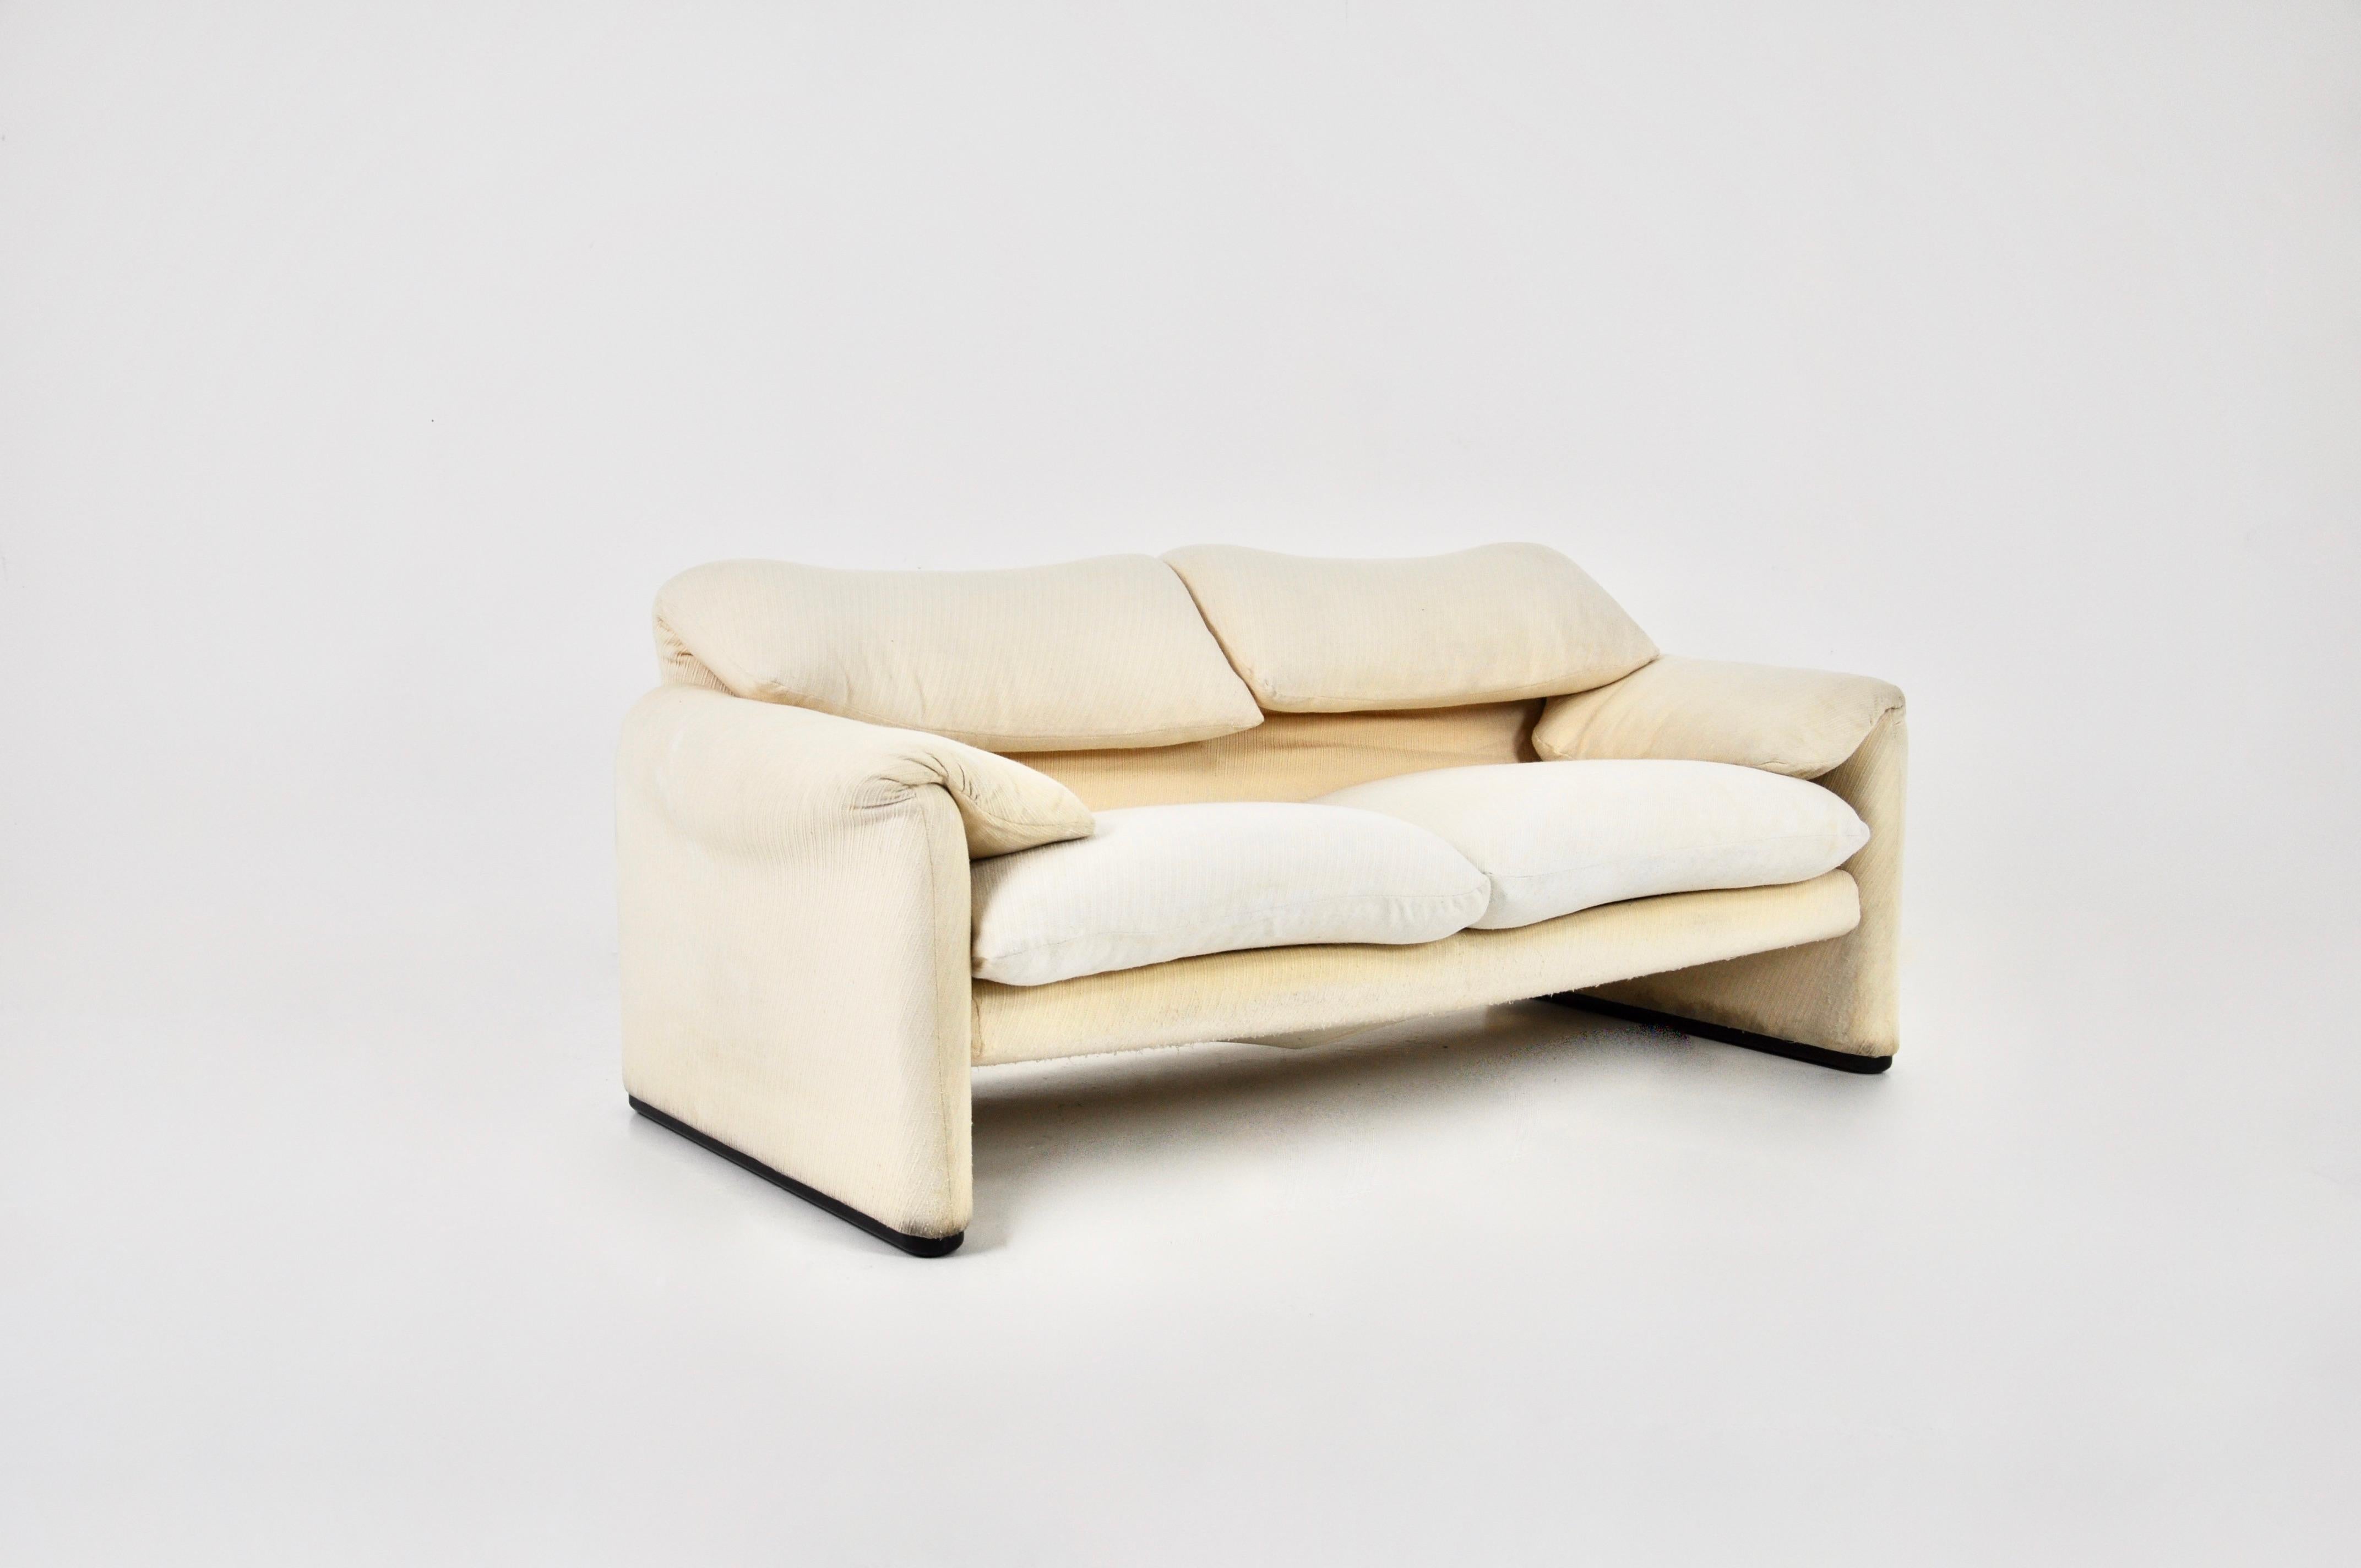 Sofa in creamy white fabric. It is possible to open the backrest for more comfort. Height when open: 96 cm. Seat height: 44 cm. Wear due to time and age.
